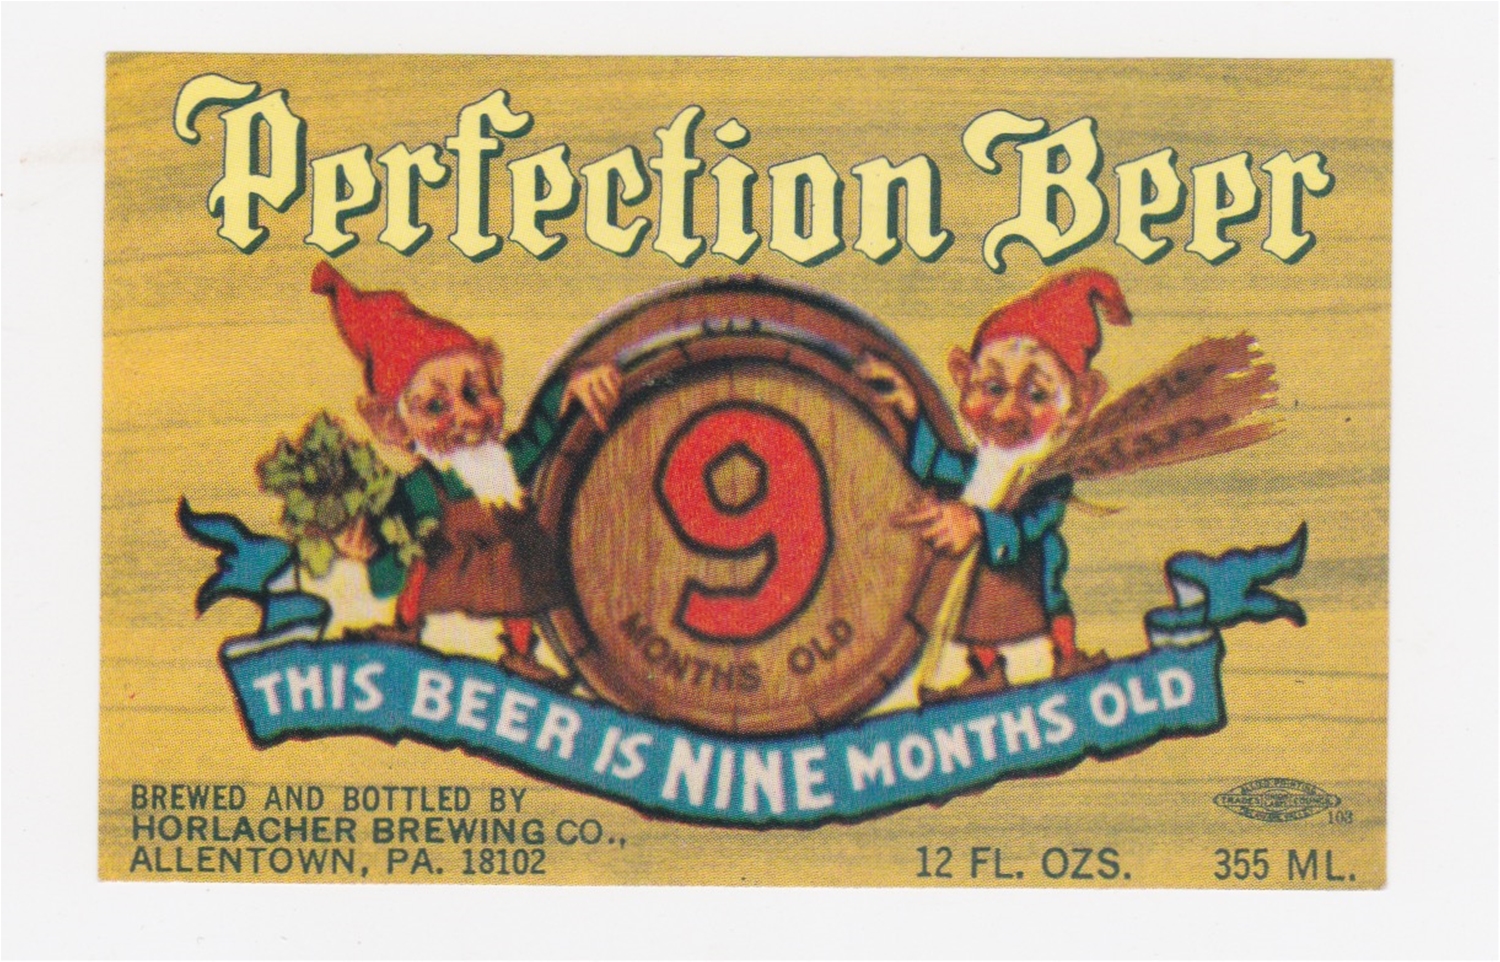 Perfection Beer 9 Months Old Beer Label